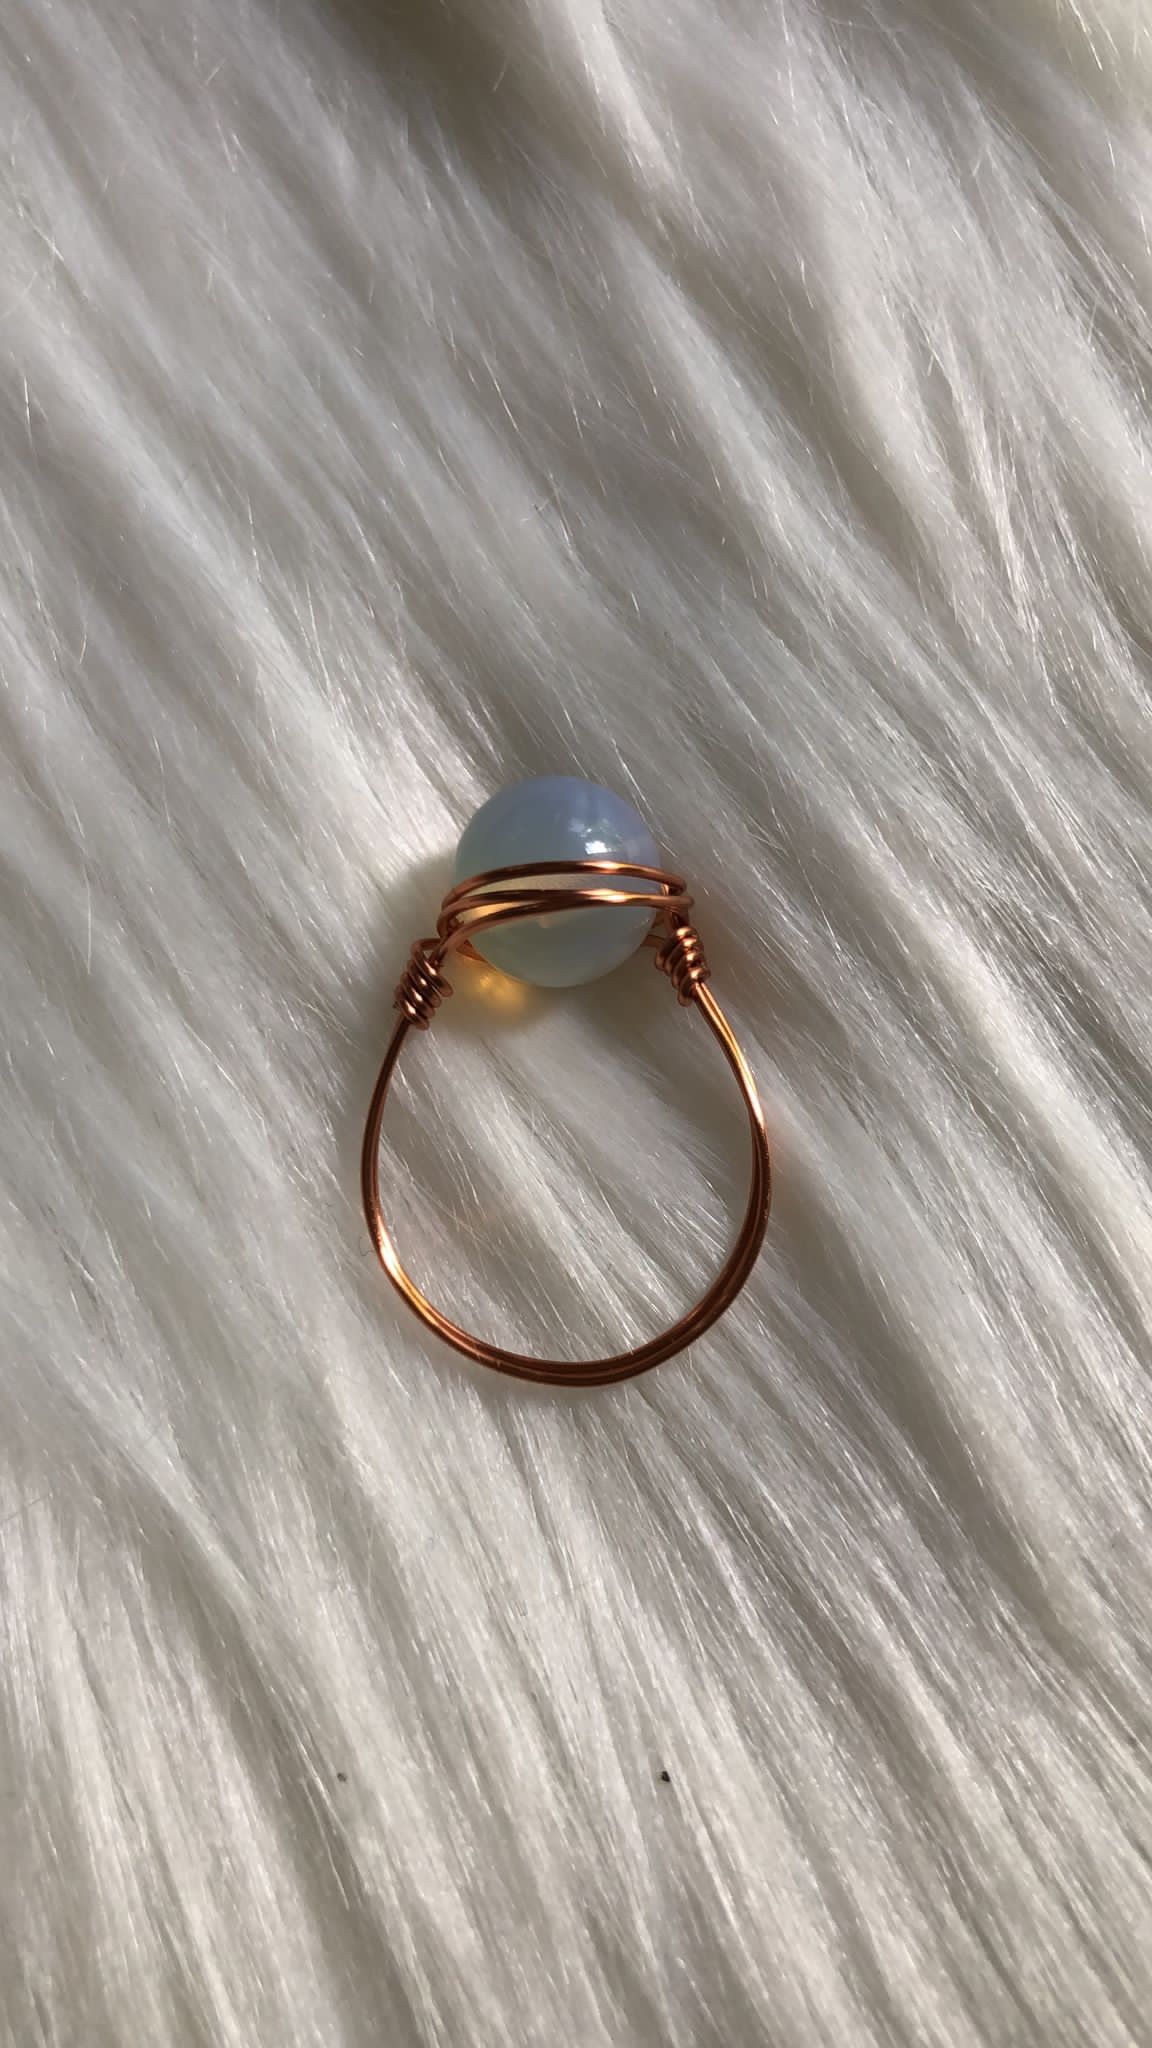 Crystal wire wrapped rings - Hand wrapped copper rings